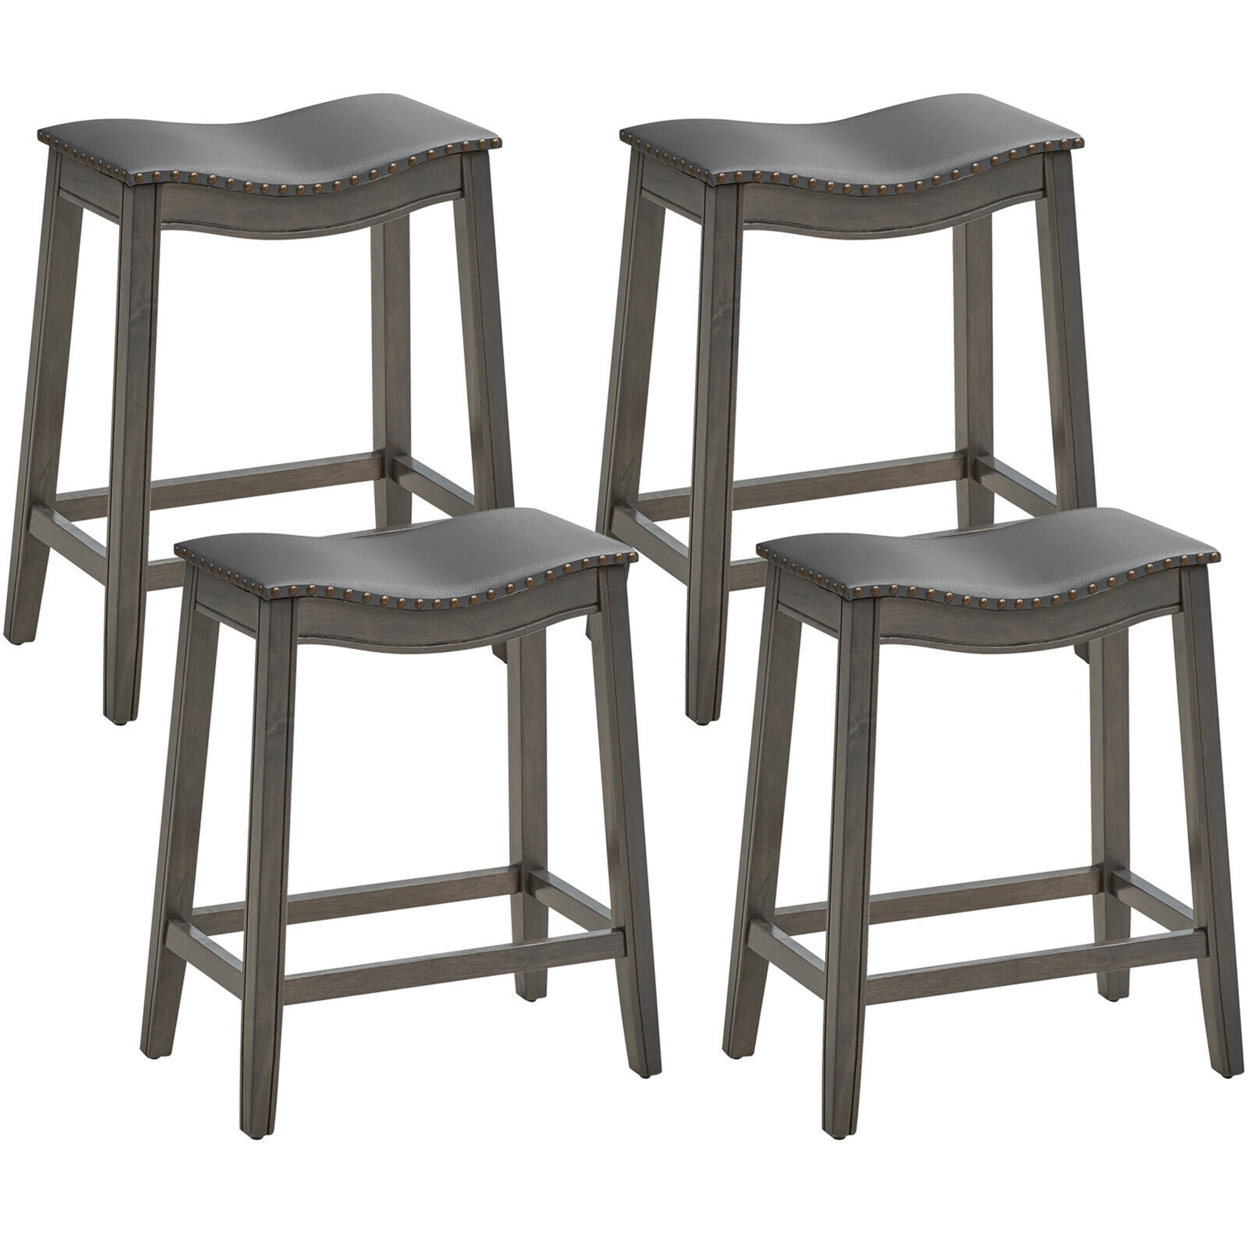 Set Of 4 Saddle Bar Stools Counter Height Kitchen Chairs W/ Rubber Wood Legs